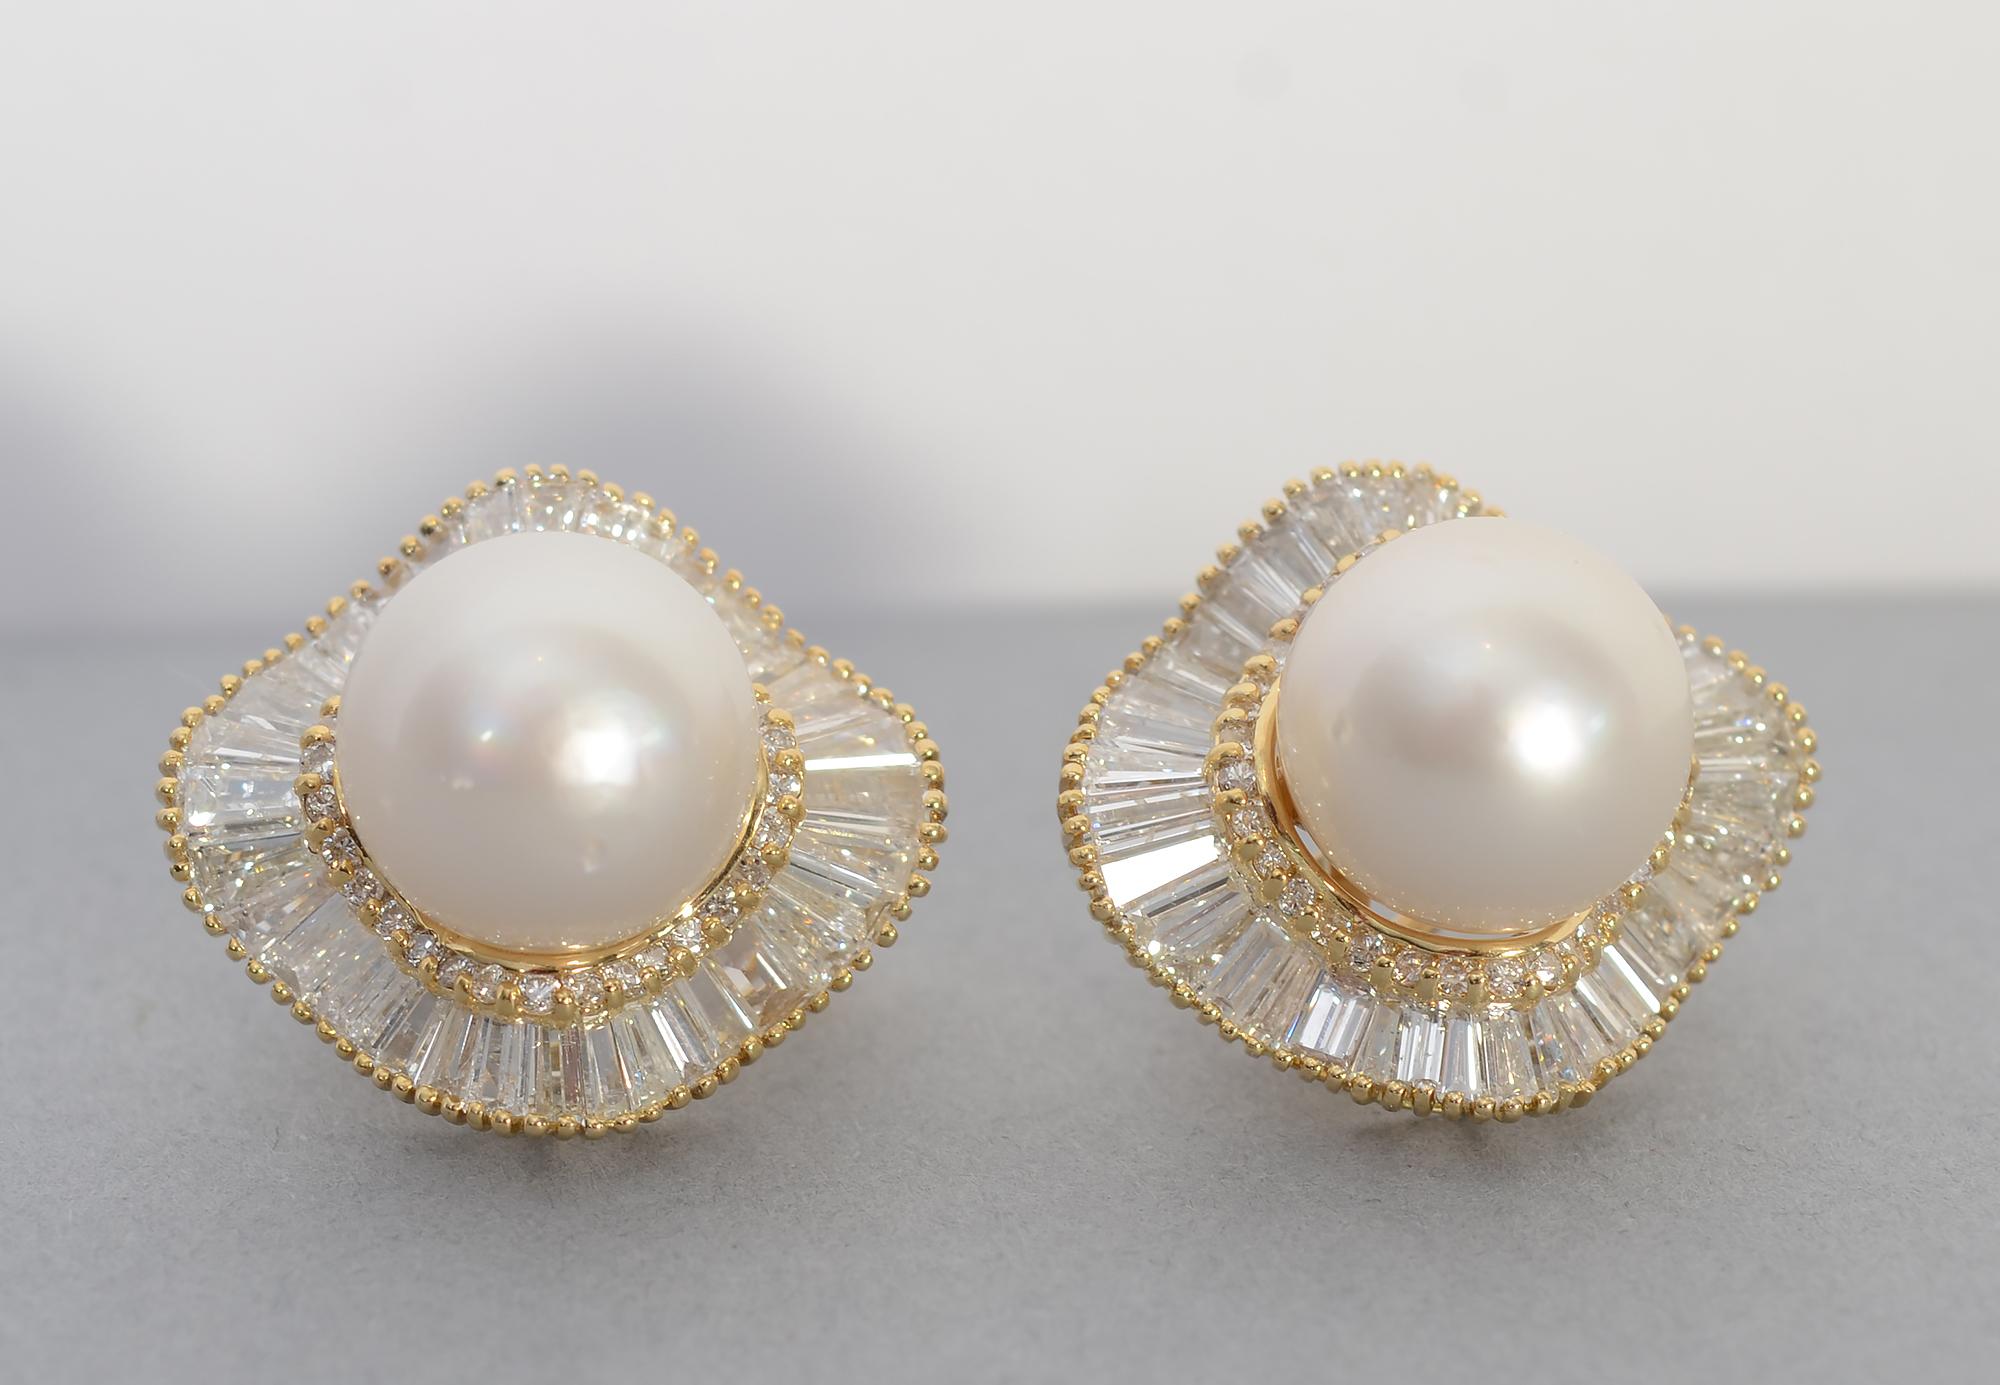 Dramatic diamond earrings centered with pearls, each of which is slightly larger than 13 mm.
Surrounding the pearl is a row of round diamonds. Outside of that is an undulating row of baguette cut diamonds. The total diamond weight is 7 carats. The